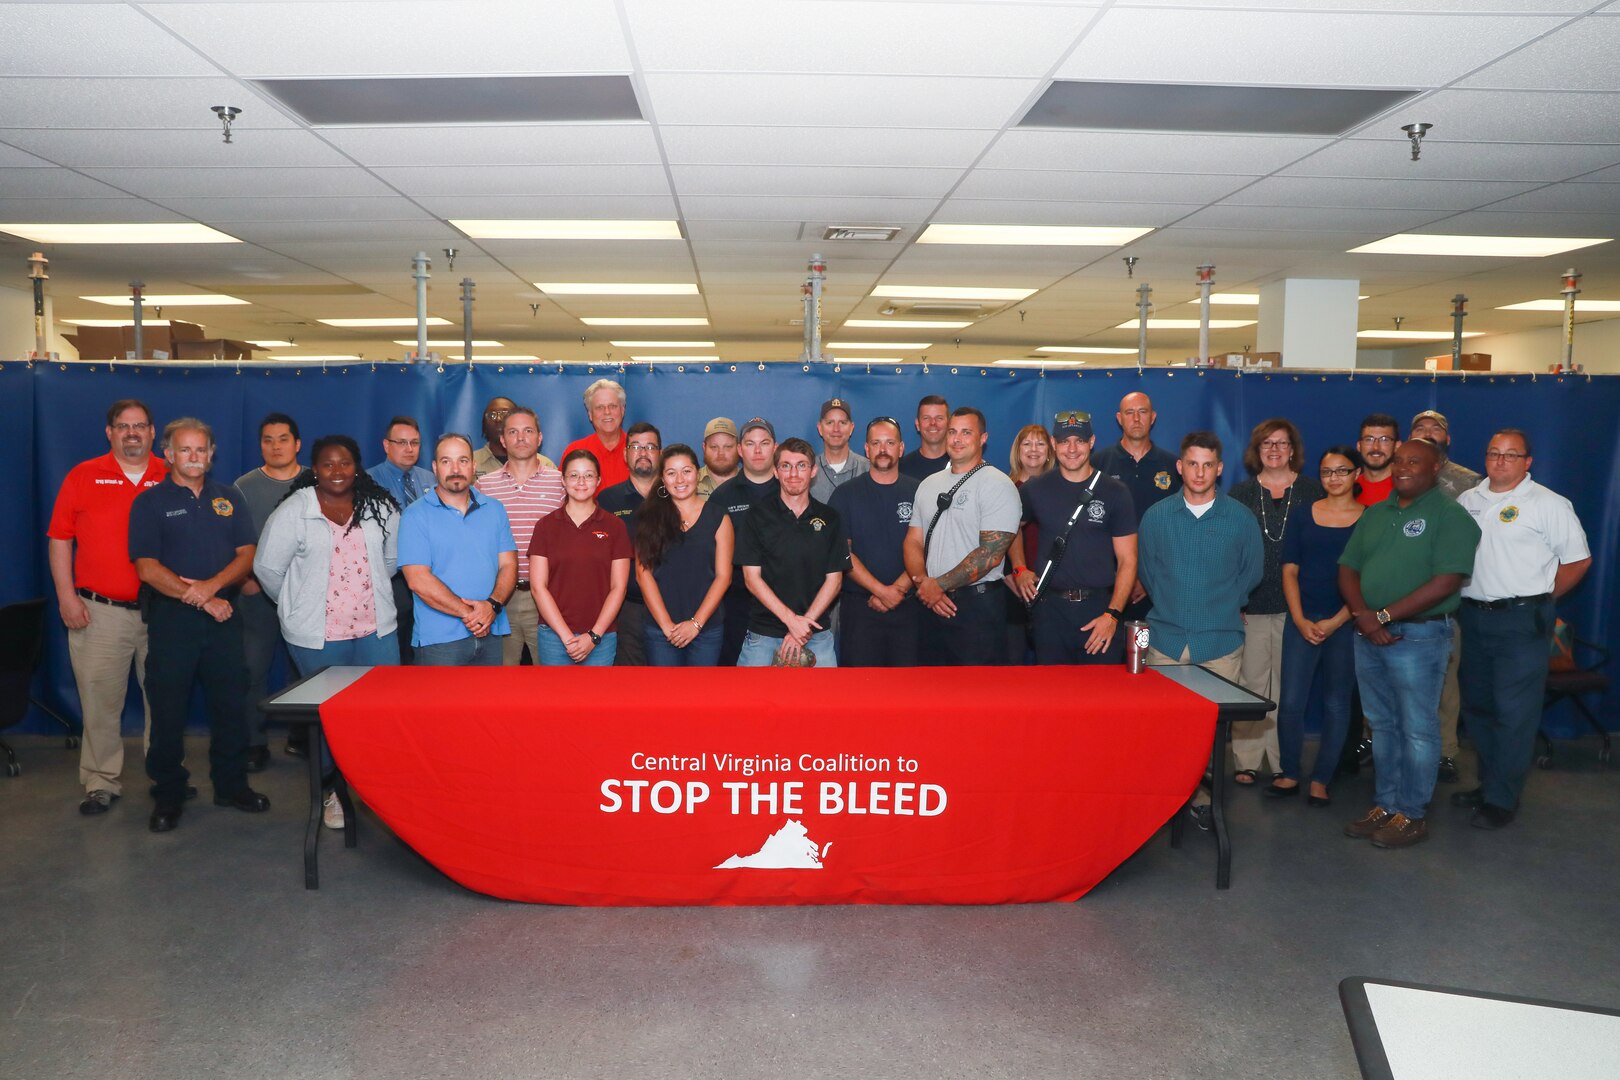 VCU CTCCE at the Naval Shipyard conducting Stop the Bleed